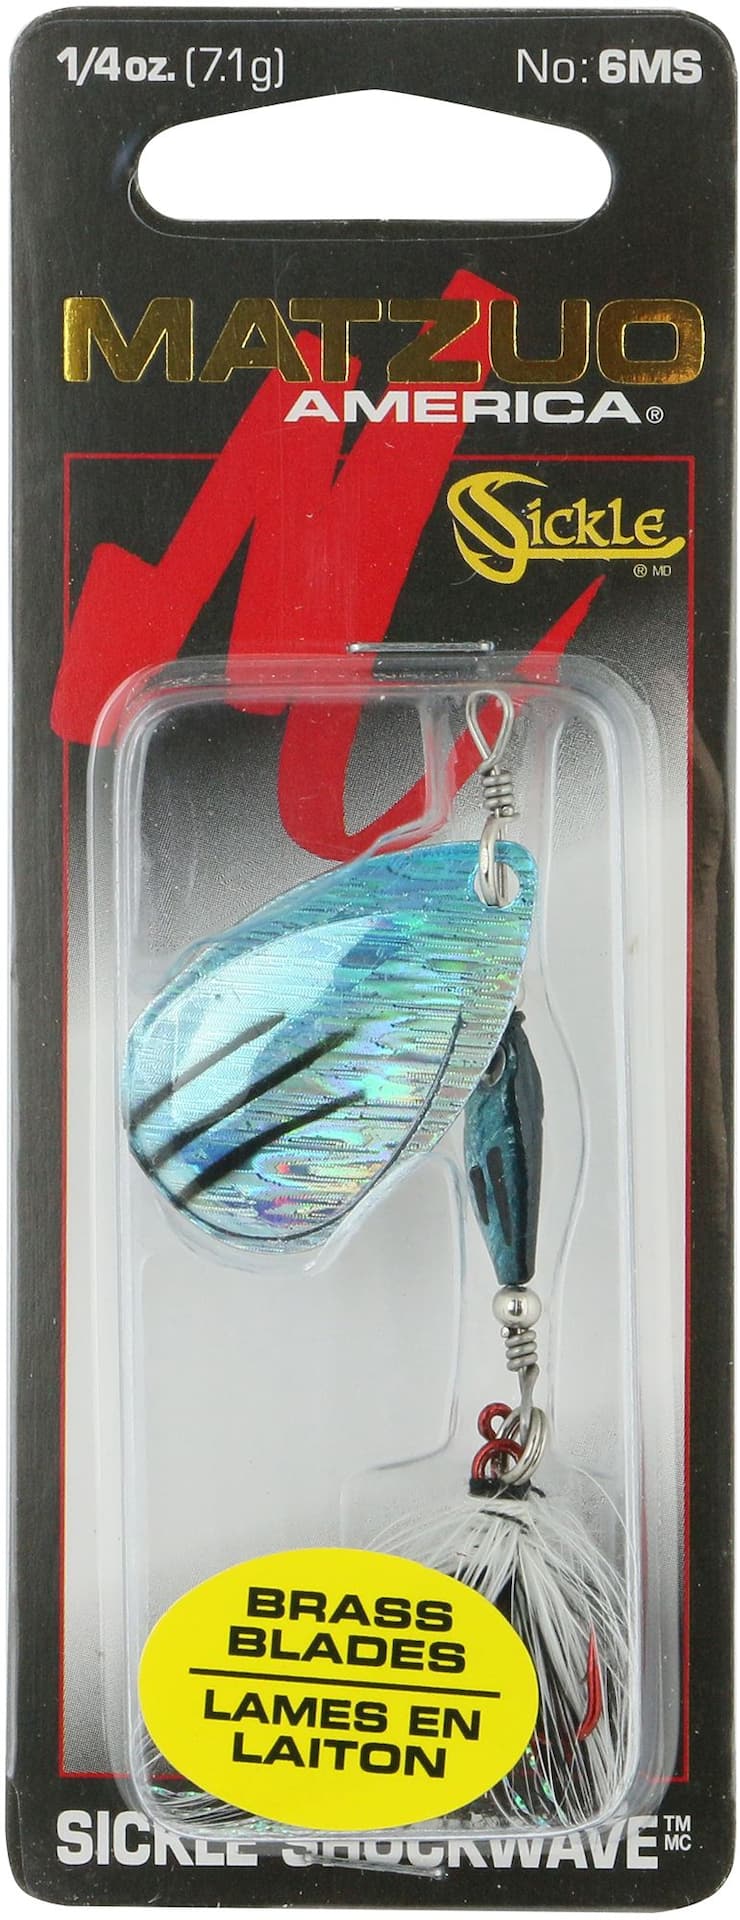 Lunkerhunt Impact Ignite, Spinnerbaits with 2 Willow Leaf Blades, Sink  Fast Fishing Lure for Bass and Trout